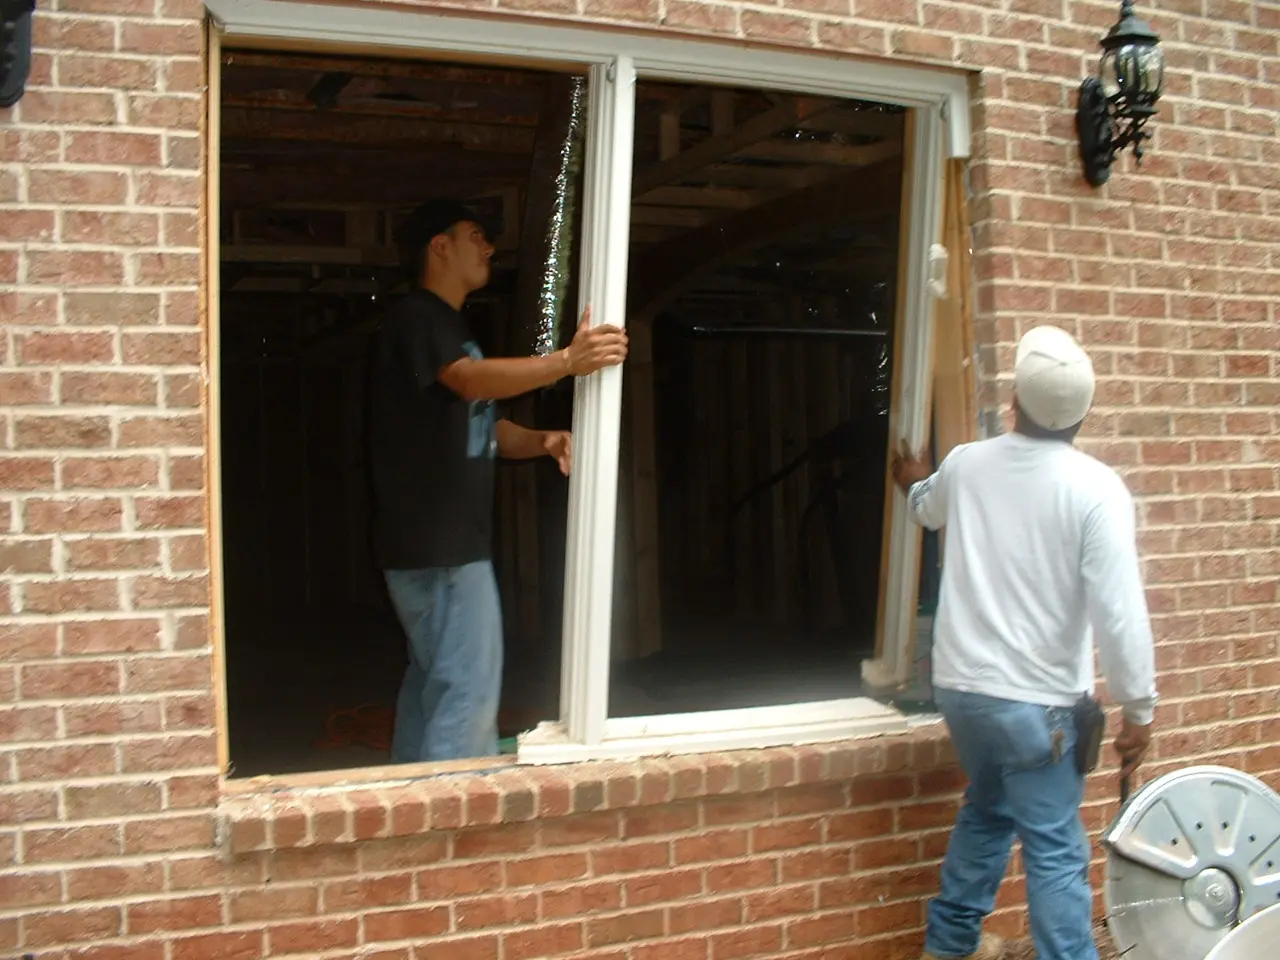 Two men are working on a window.